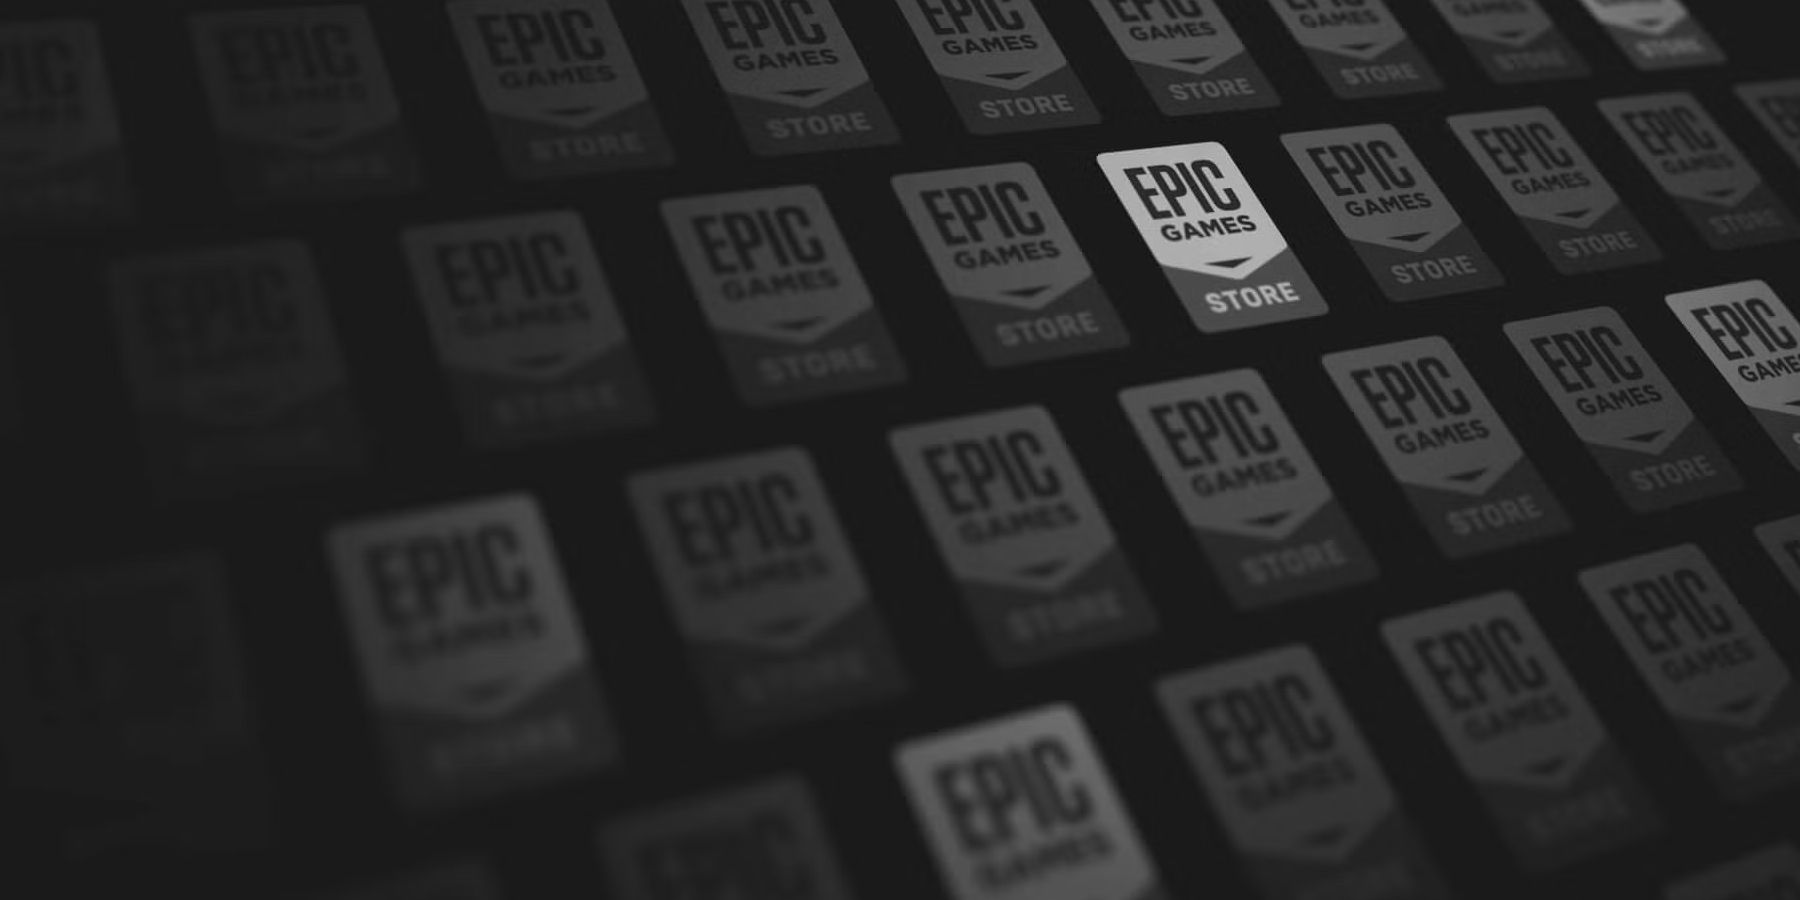 epic games store logo graphic